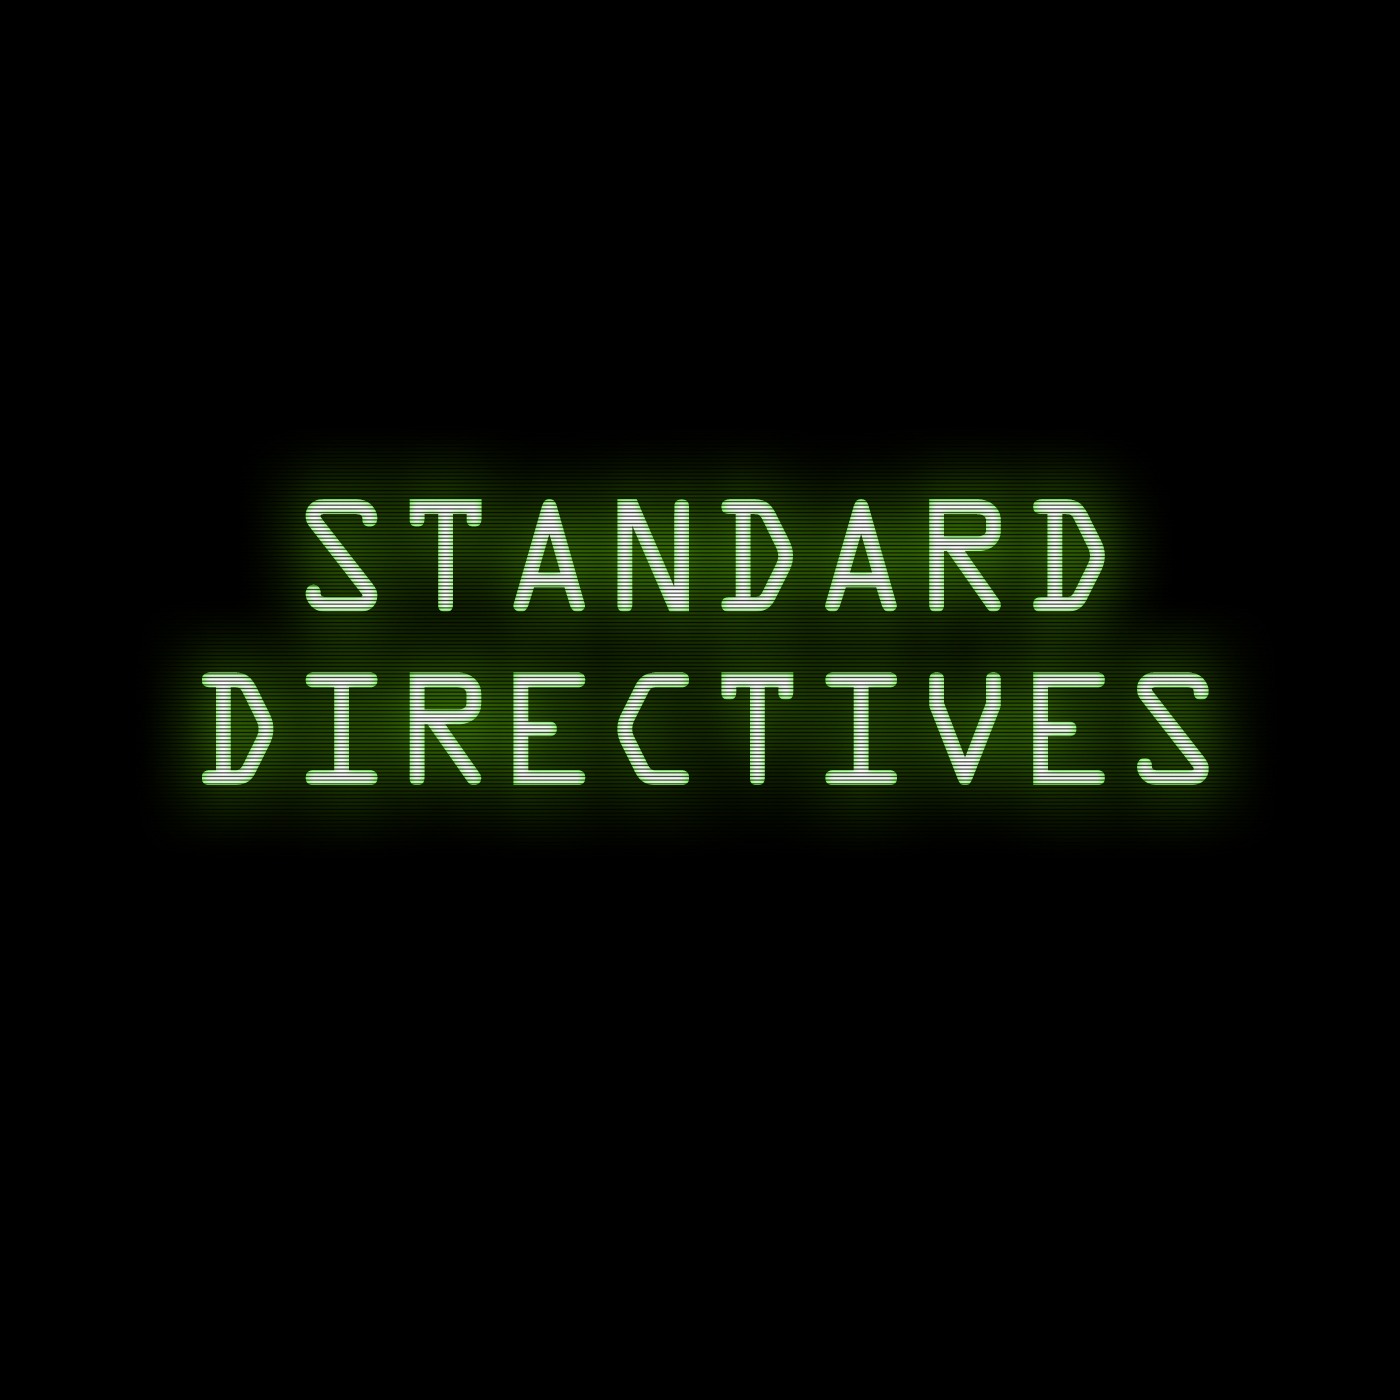 Standard Directive 011: Don't Care About Any of That